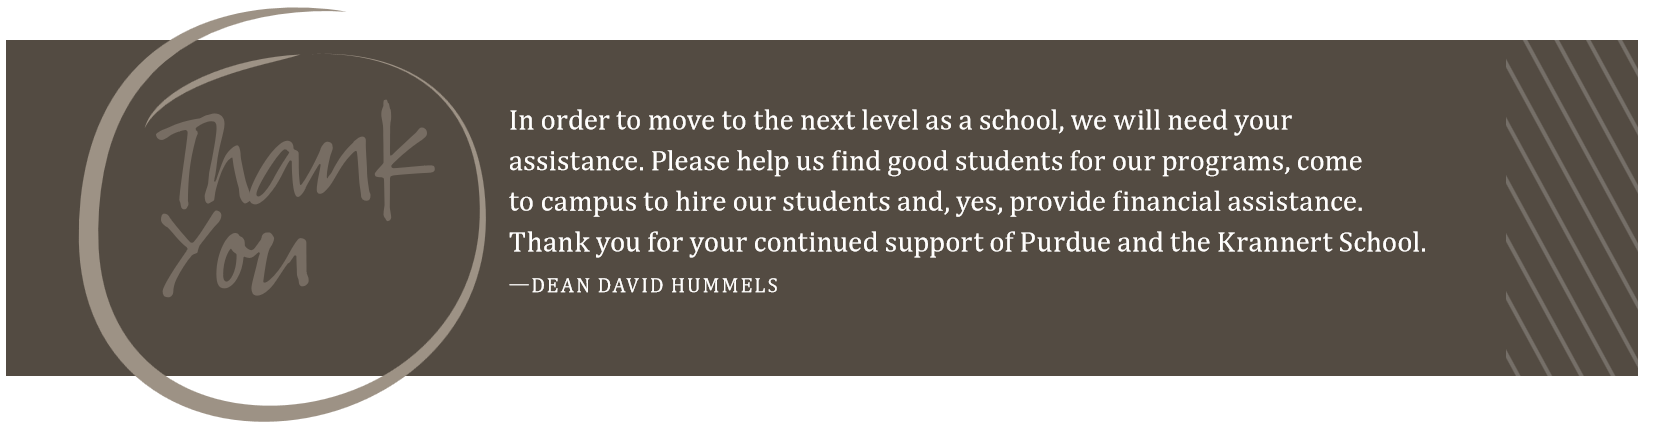 Thank You. In order to move to the next level as a school, we will need your assistance. Please help us find good students for our programs, come to campus to hire our students and, yes, provide financial assistance. Thank you for your continued support of Purdue and the Krannert School. - Dean David Hummels